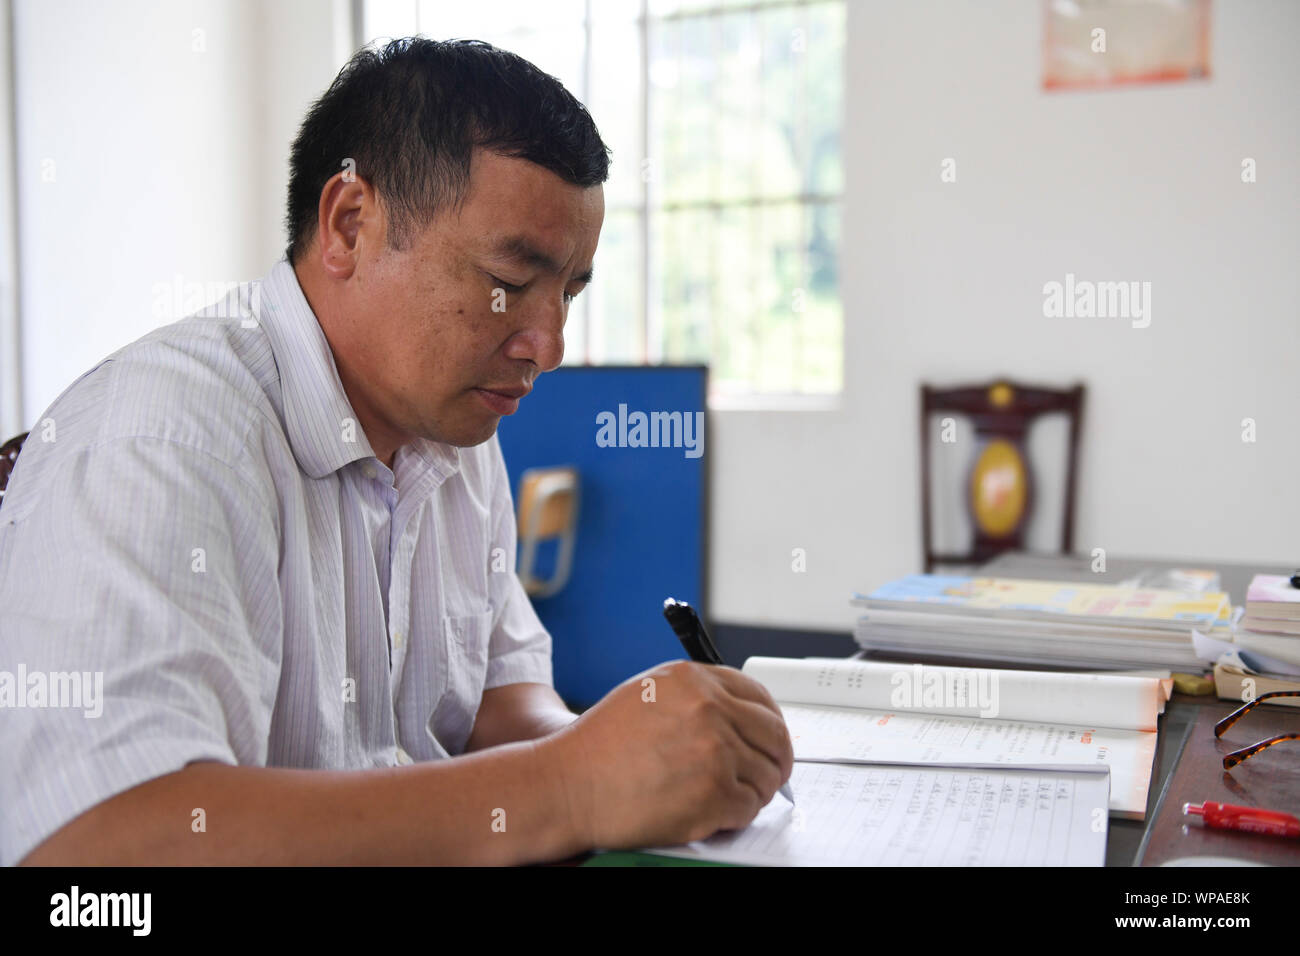 (190908) -- TIANDONG, Sept. 8, 2019 (Xinhua) -- Wei Guoji prepares lessons at the office of Tuogua Primary School at Tuogua Village in Zuodeng Yao Ethnic Township of Tiandong County, south China's Guangxi Zhuang Autonomous Region, Sept. 3, 2019. Located in remote mountains of Tiandong county, Tuogua primary school is over 60 km away from the county seat, to which only a rugged mountain road can lead.     The 53-year-old Wei Guoji, a native to the village, is the principal of the village school. Wei was recruited as a substitute teacher of the school after graduation from junior high school at Stock Photo